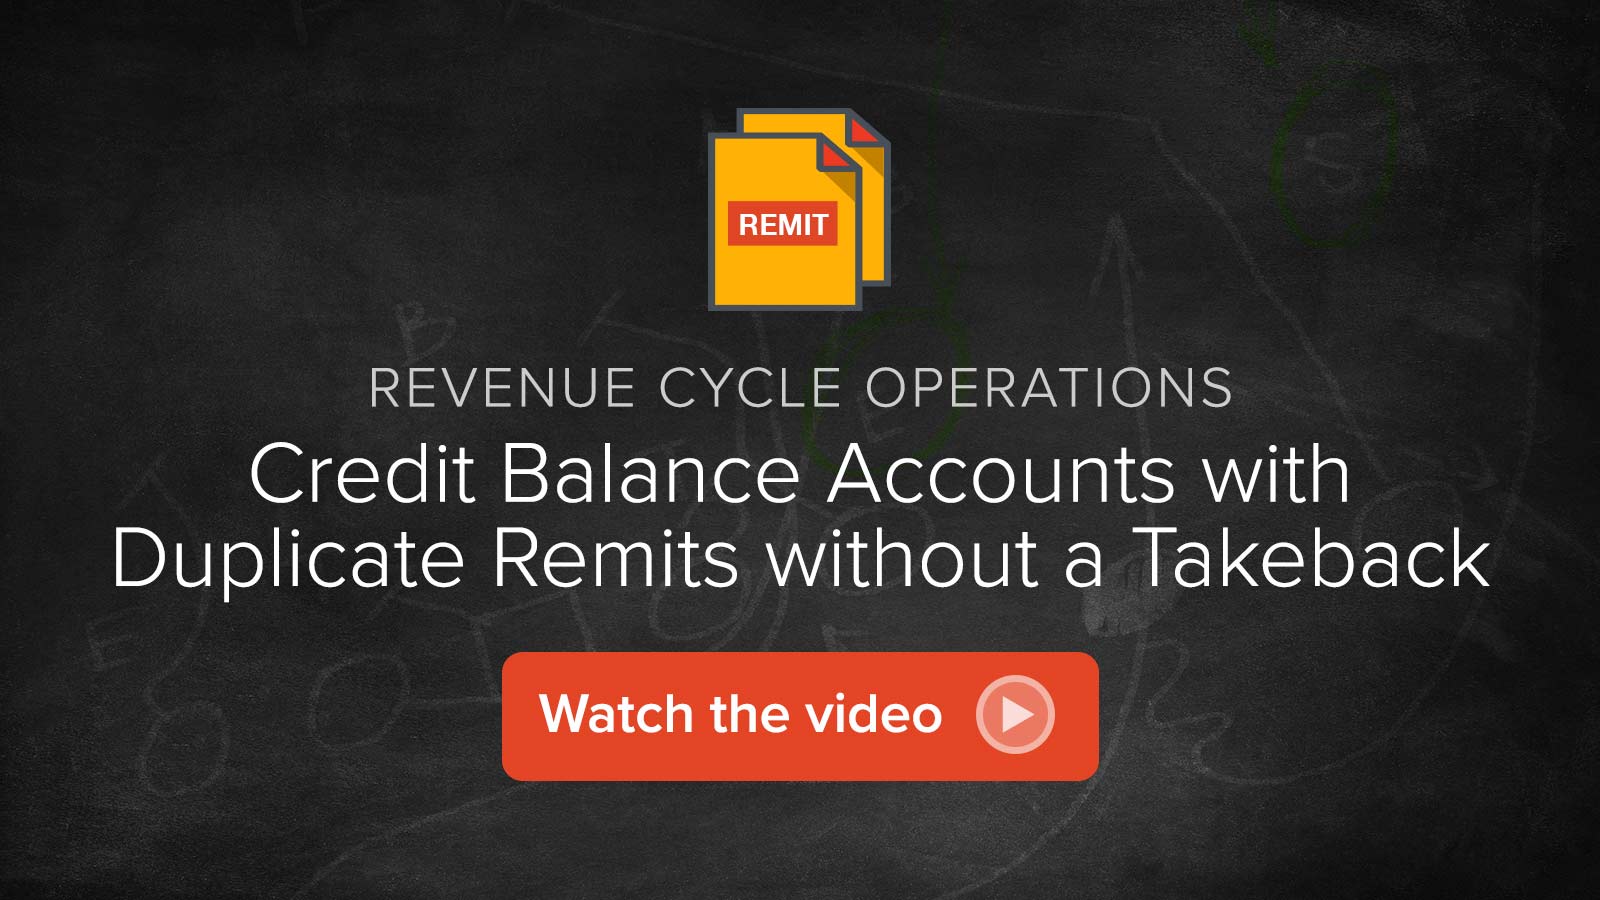 Watch the Credit Balance Accounts with Duplicate Remits without a Takeback  video